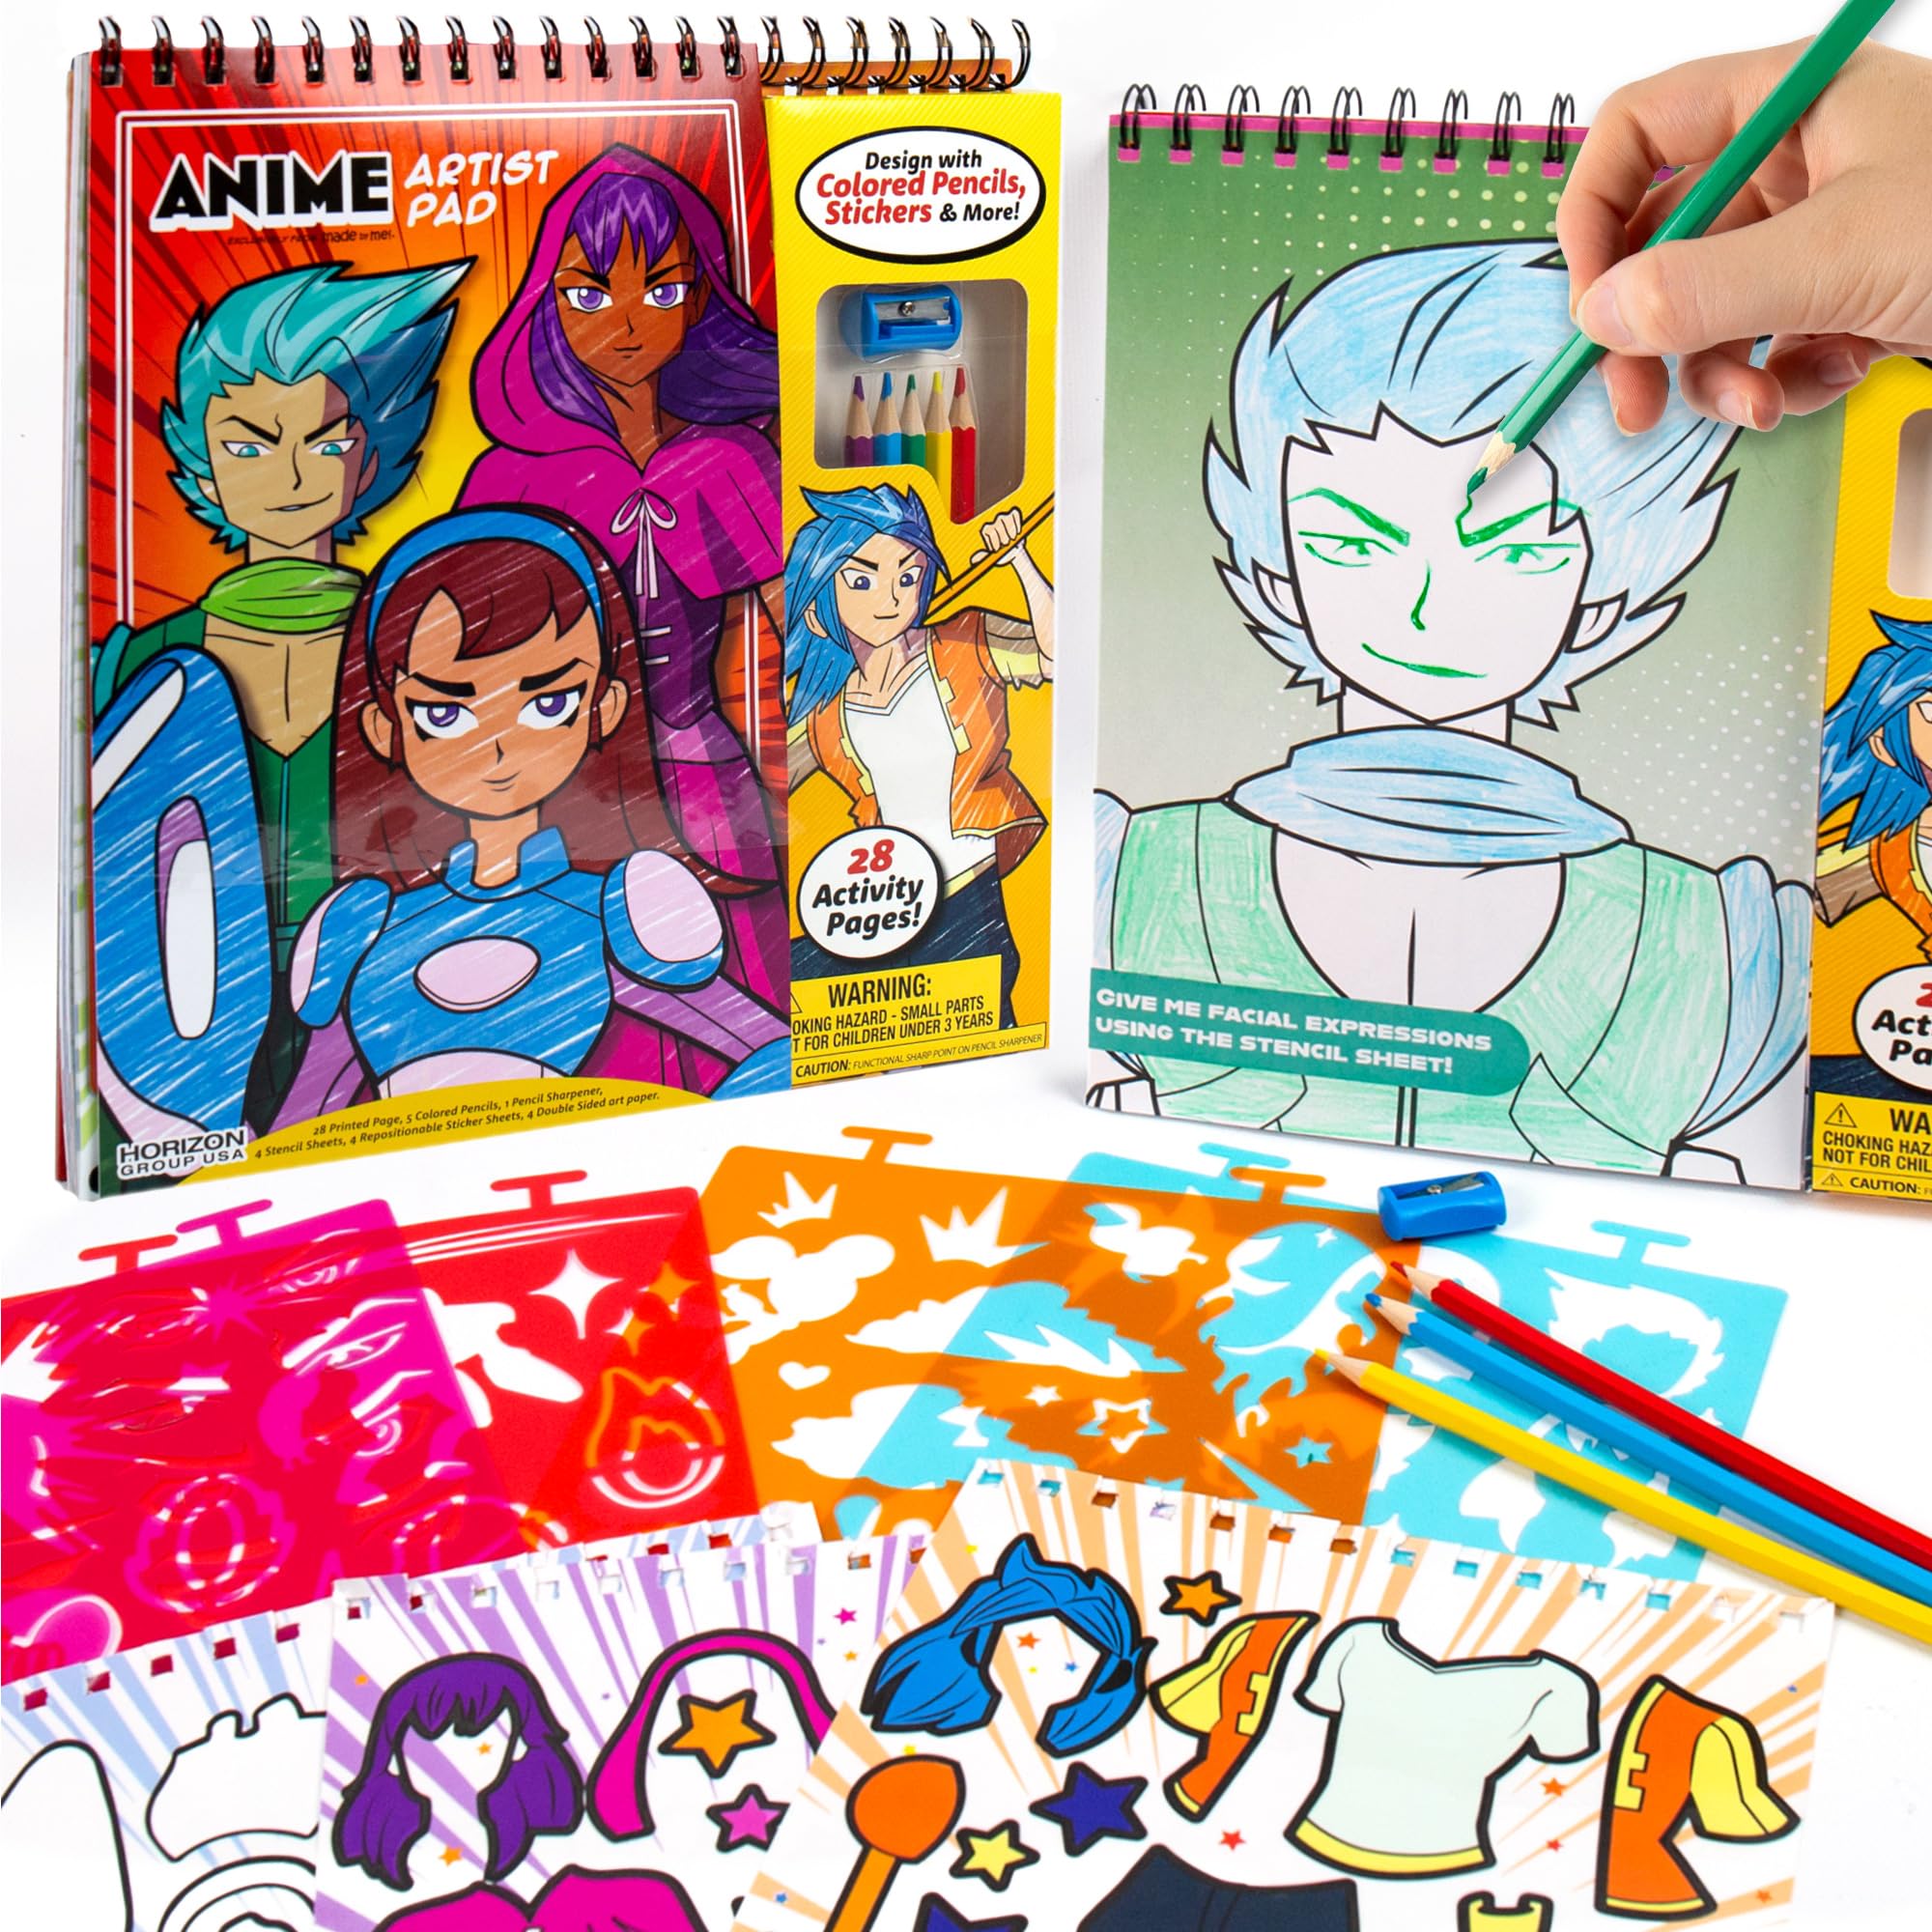 Made By Me Anime Artist Pad, 28-Page Coloring Book, Includes Fun Art Supplies & Removable Stickers Inspired by Comic Books, Great Gifts for Anime Enthusiasts, Coloring Books for Kids Ages 4-8